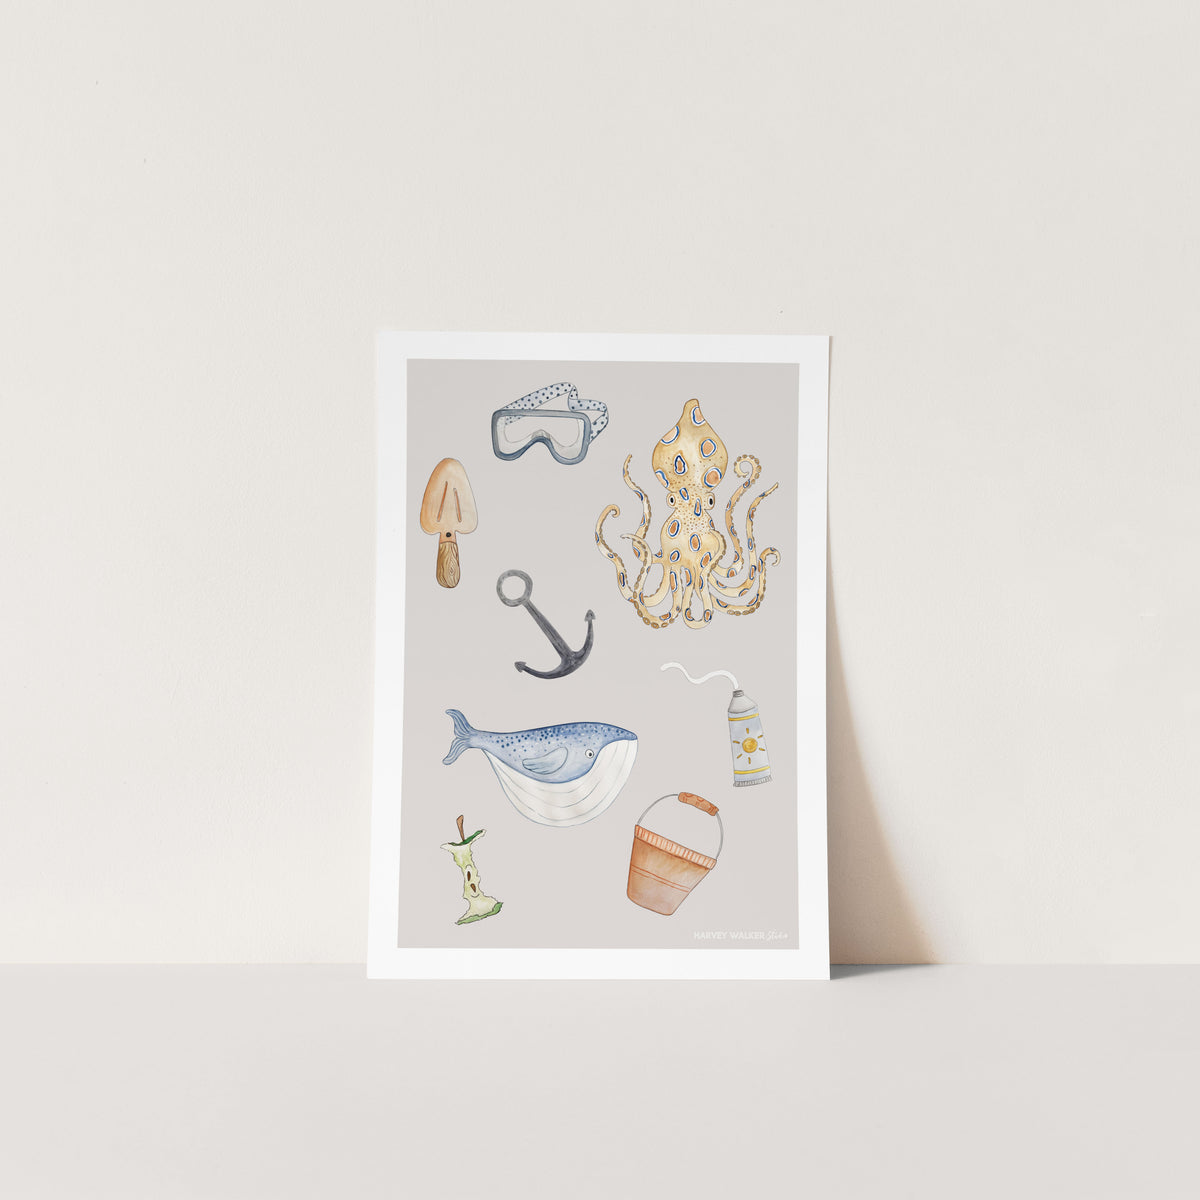 Unframed coastal print of hand illustrated beach adventures and discoveries. Including images of an octopus, goggles, whale, bucket. Great gift for a present for a baby or timless and fun print for kids rooms.